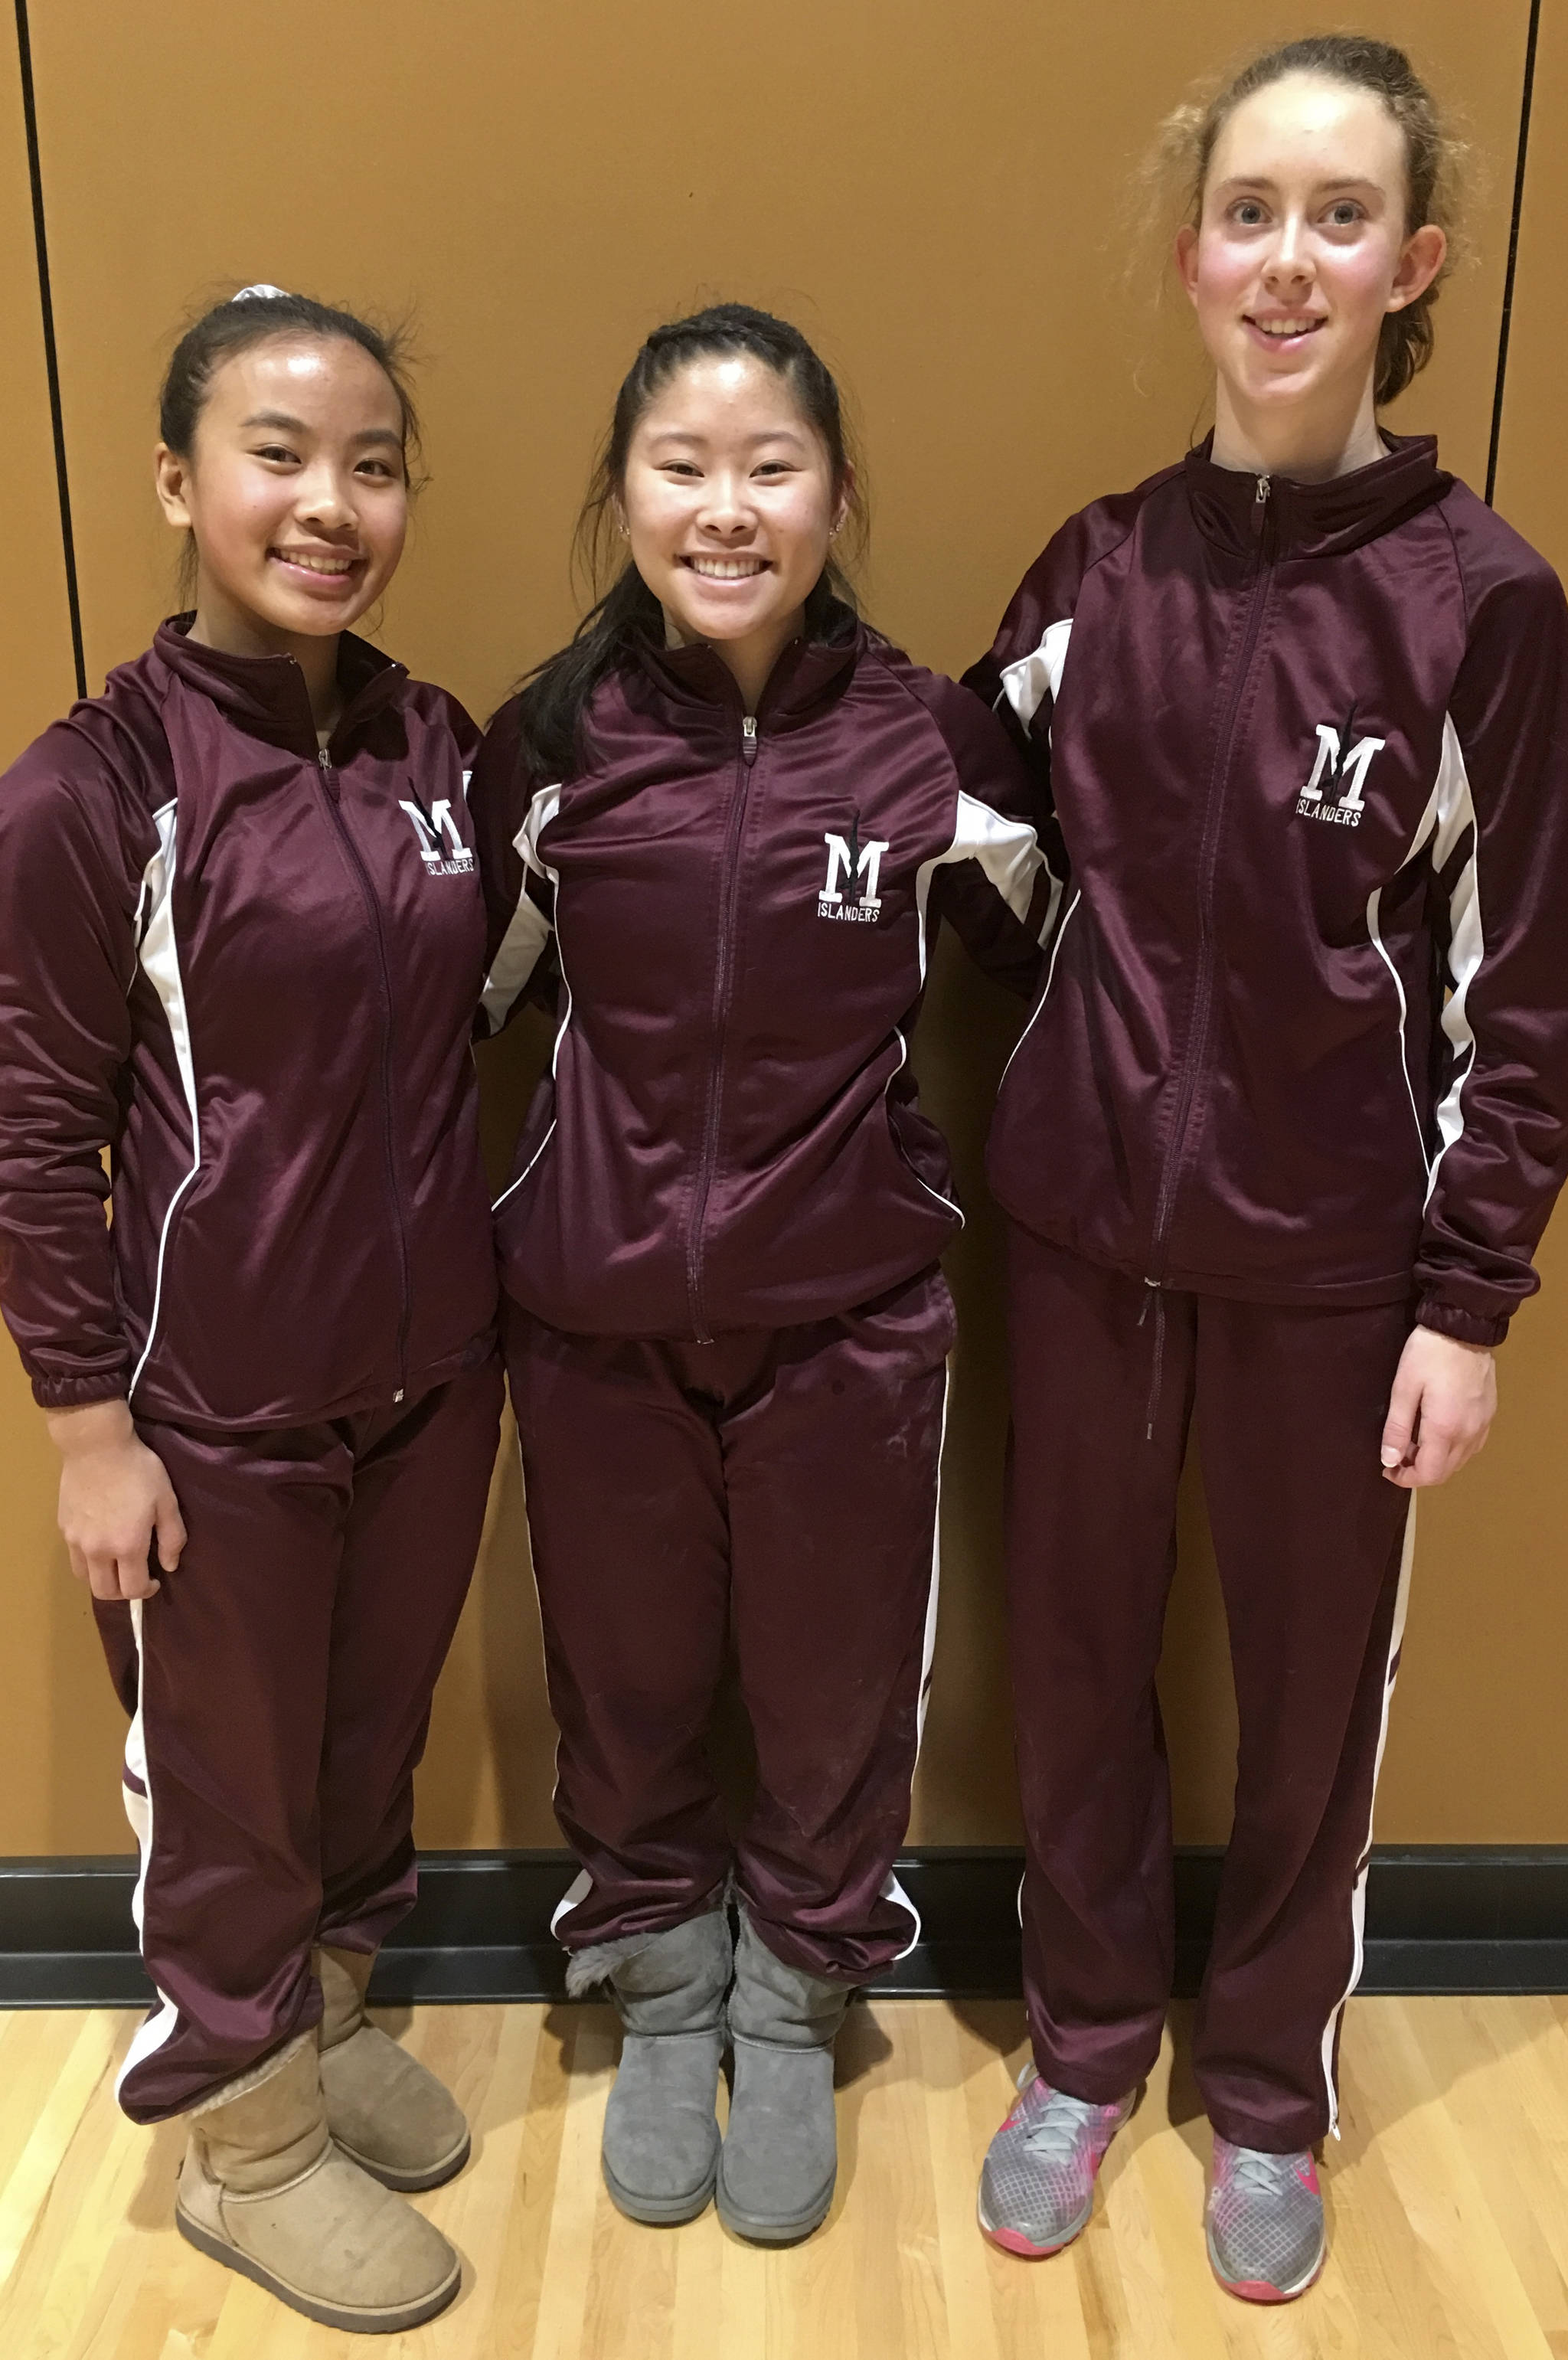 Photo courtesy of Martha Phelps                                The Mercer Island Islanders gymnastics team earned a 156-79 win against the Redmond Mustangs on Jan. 25. The Islanders improved their regular season overall record to 5-2 in dual meets with the victory. Freshman Ava Motroni captured first place in vault, beam and in all-around. Junior Mya Levin earned second place in vault, beam and all-around. Freshman Susie Lepow registered a first place finish on bars. Motroni, Levin and Lepow are pictured in the above photo.